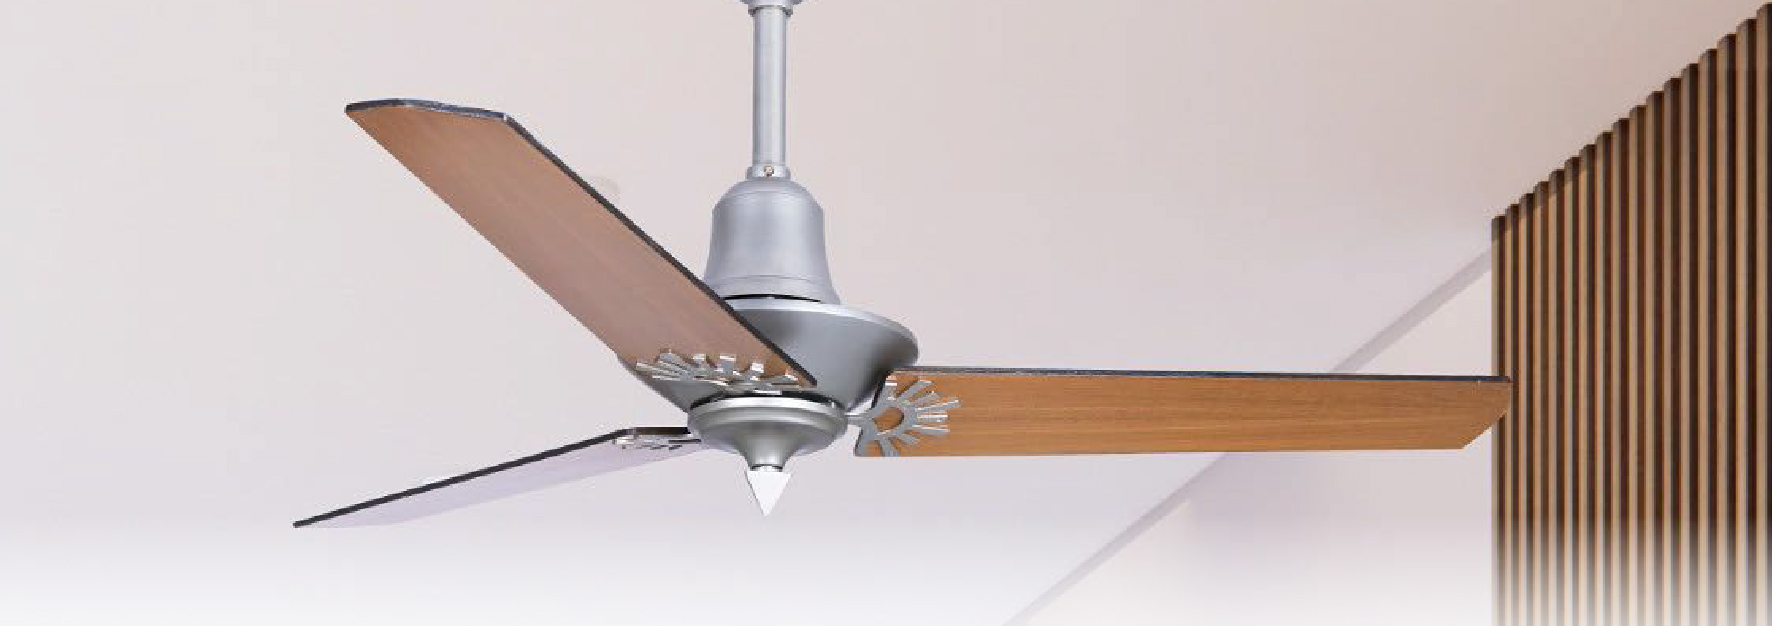 Can Ceiling Fans Save Your Money on Energy Bills?